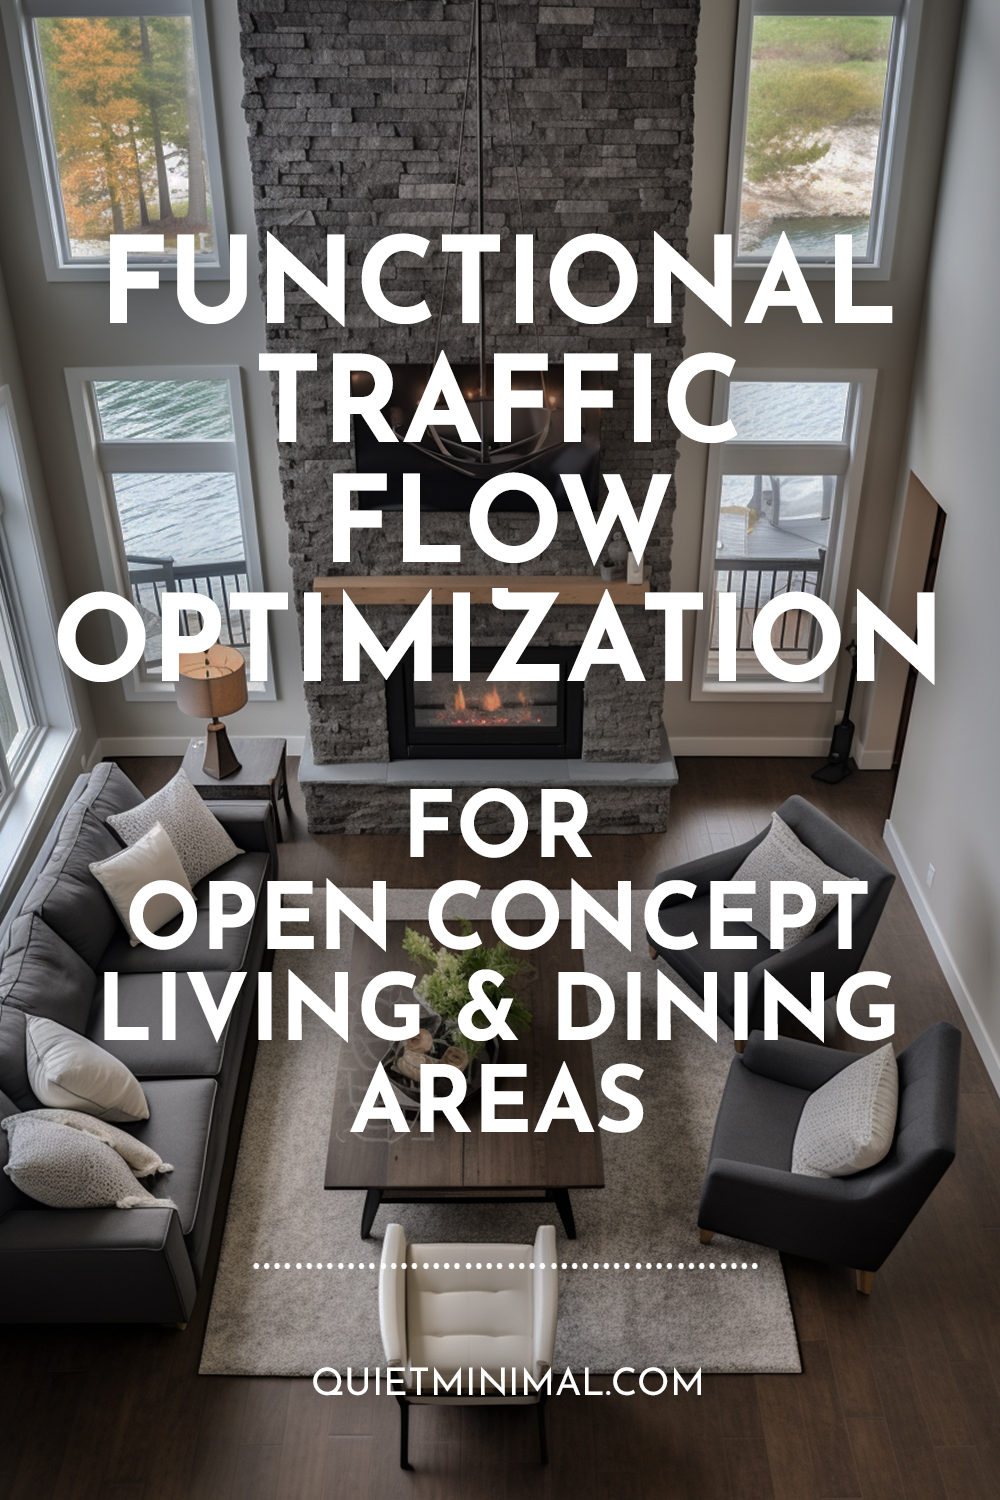 Functional traffic flow optimization for open concept dining areas.